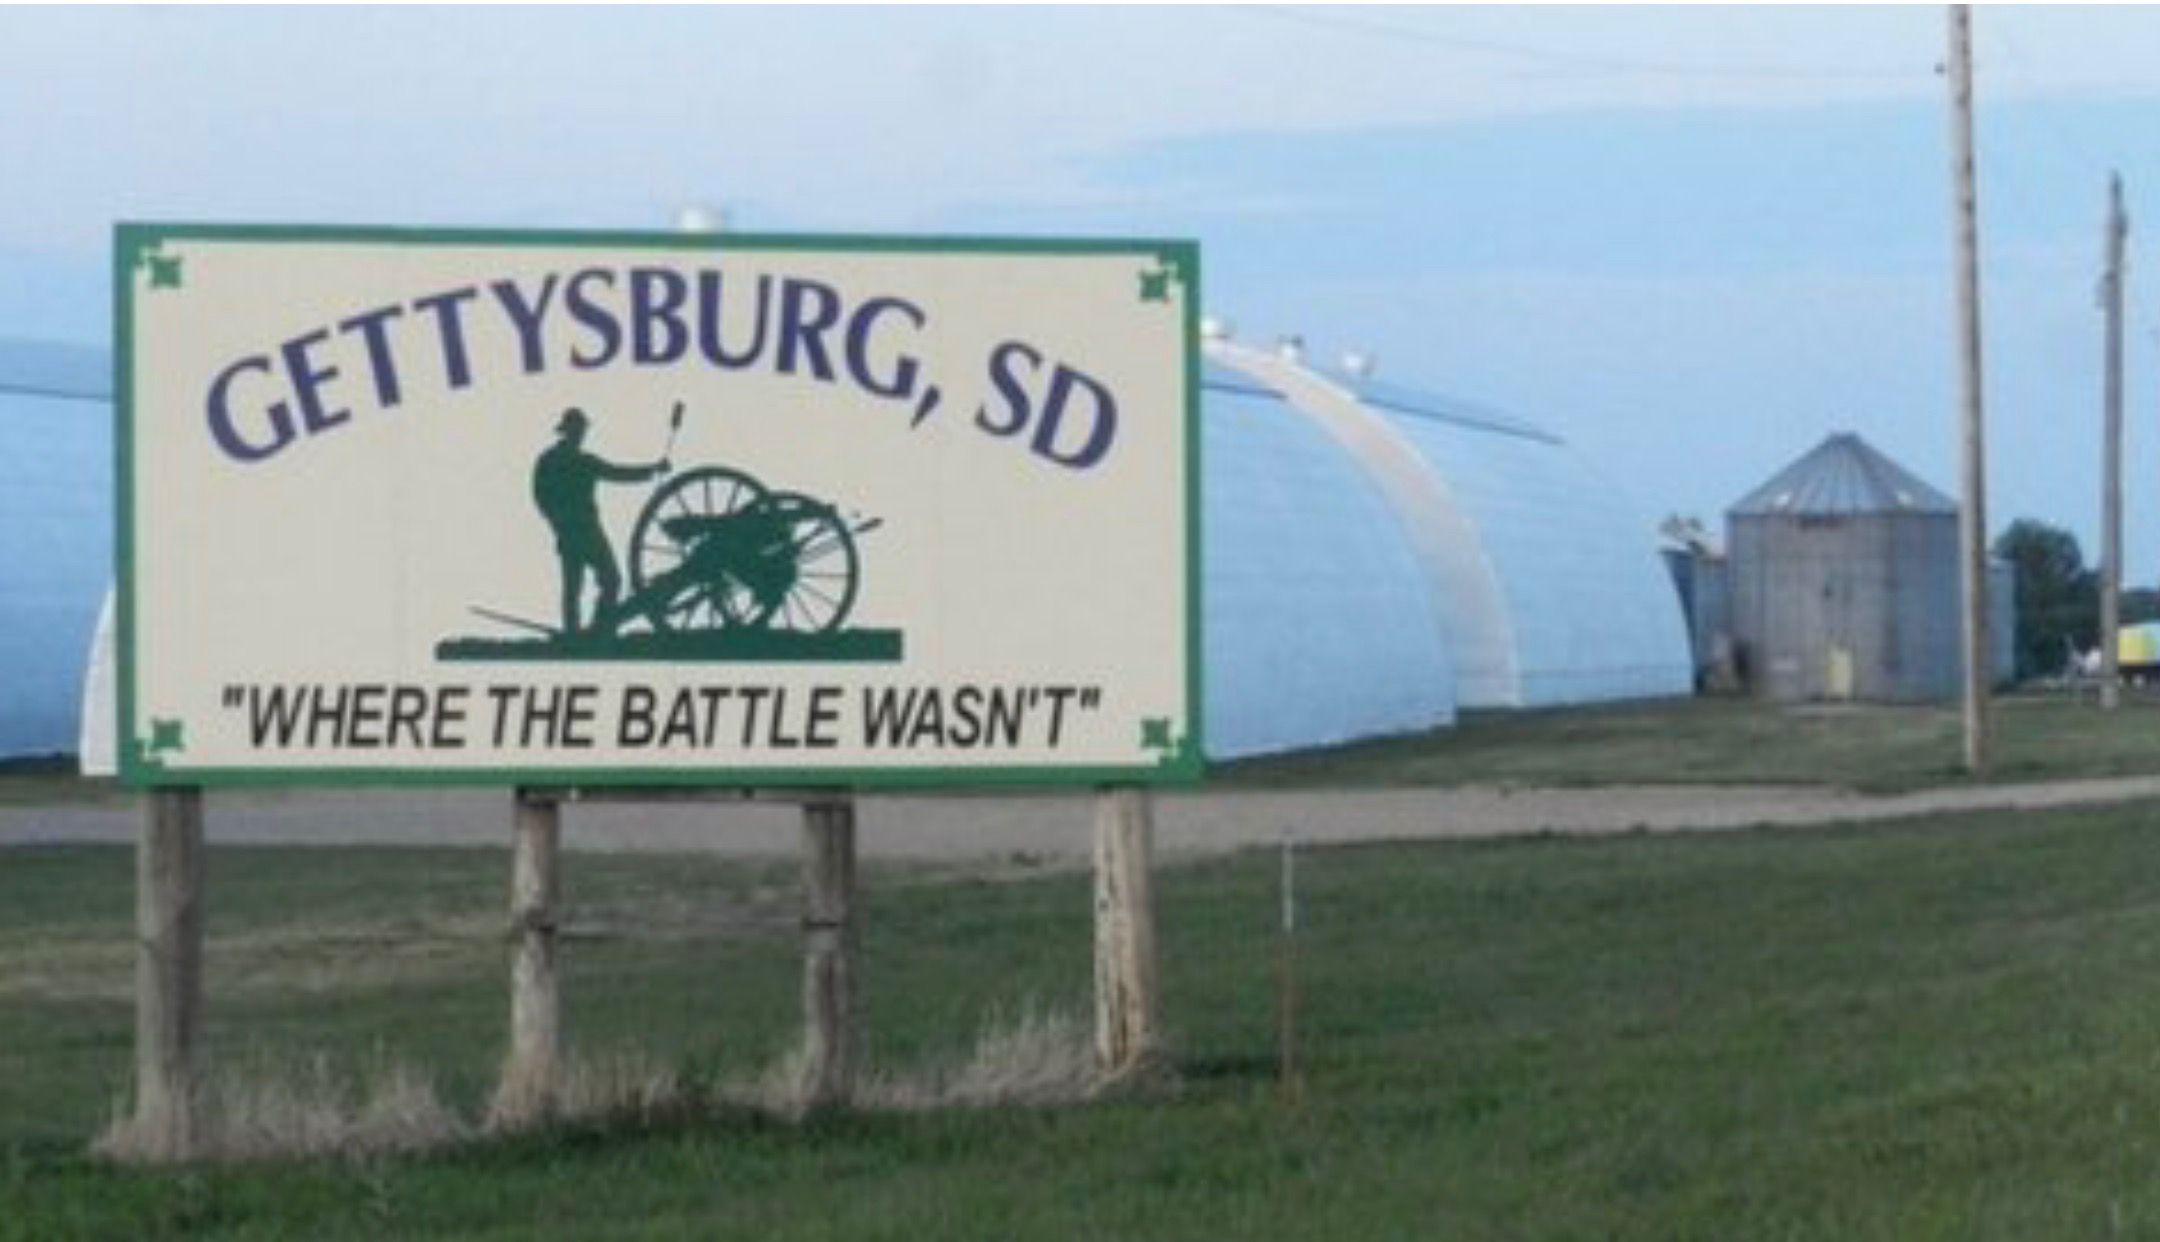 The town motto of Gettysburg, SD.